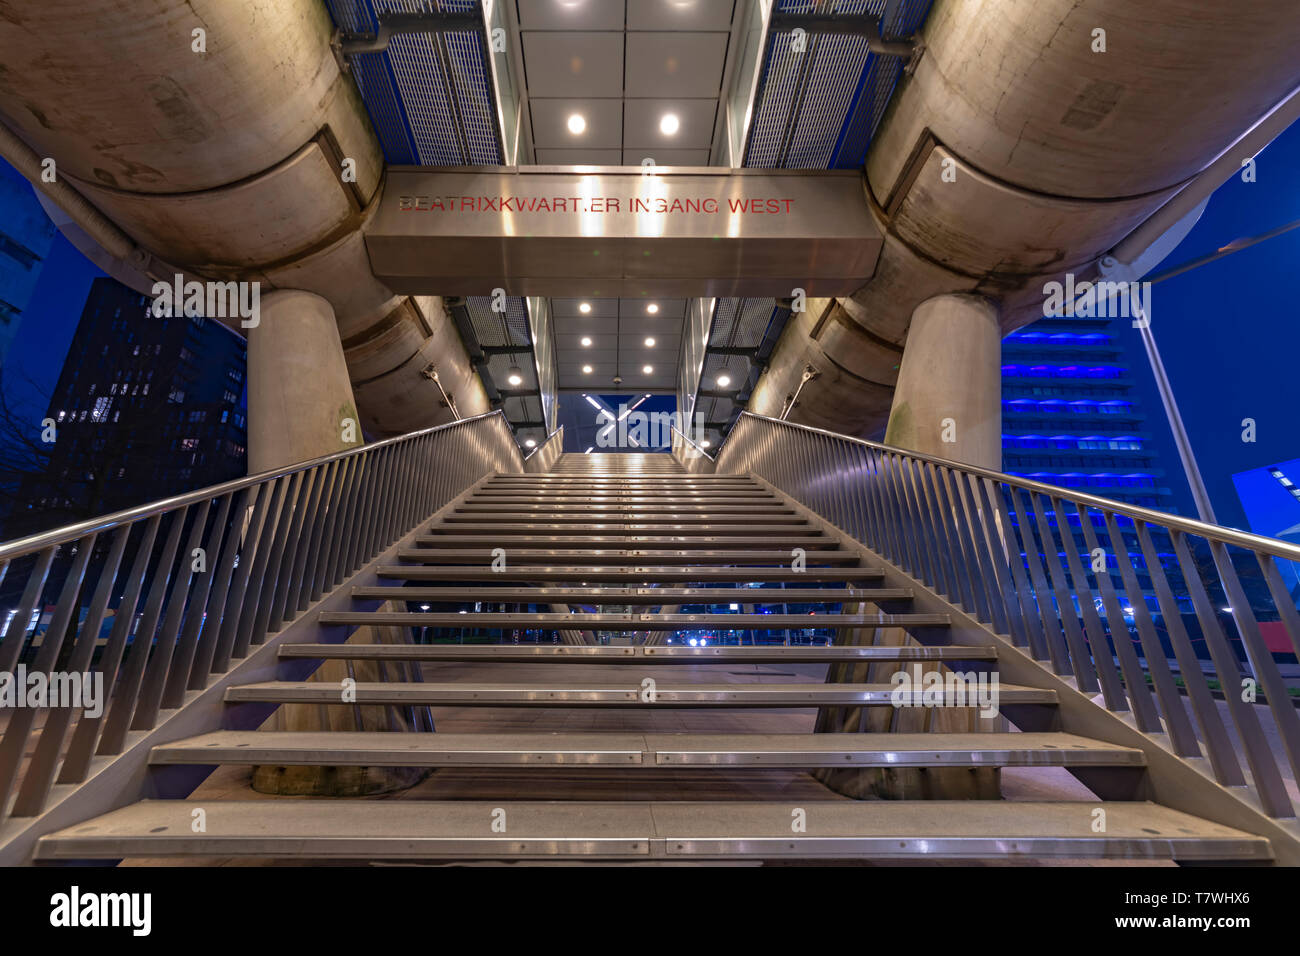 Beatrixkwartier (Beatrix district in Dutch) entrance east Escalator to a tramway station in The Hague at night Stock Photo